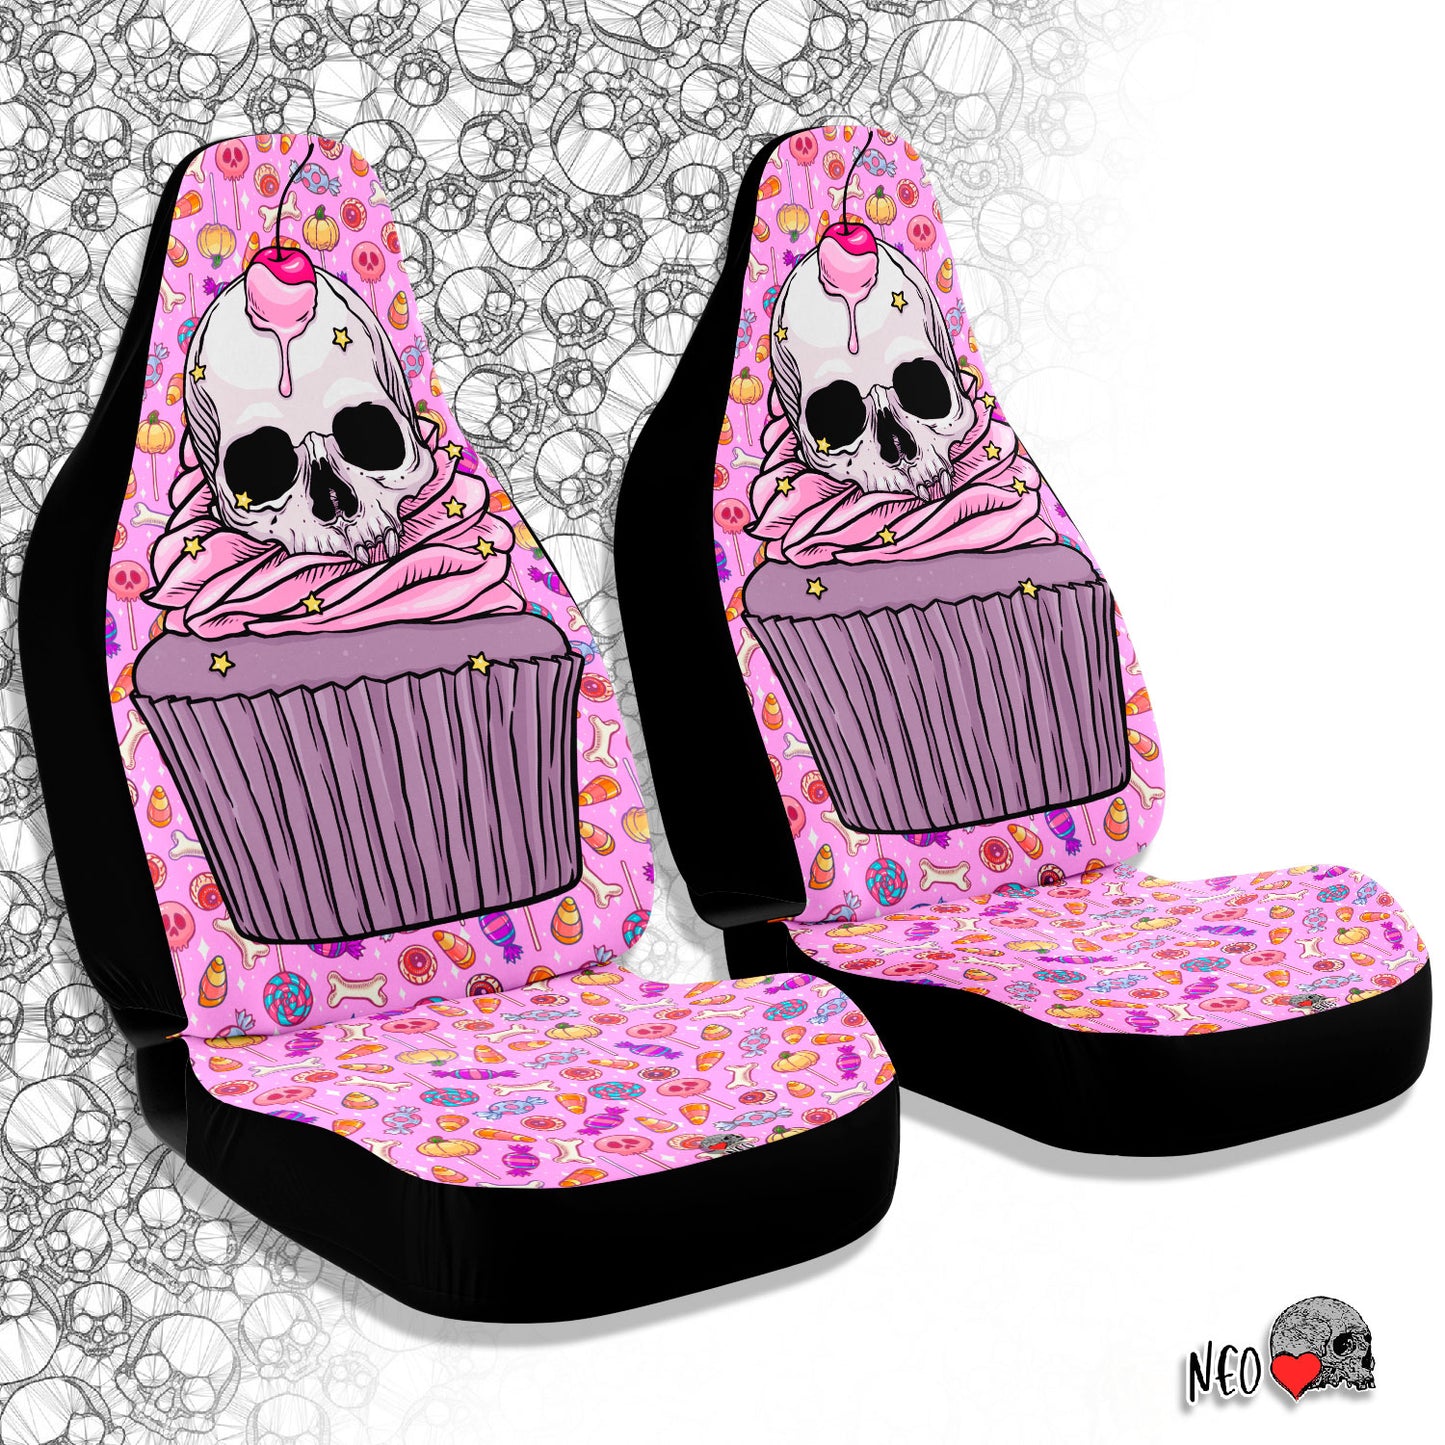 Skull Cup Cake Car Seat Covers